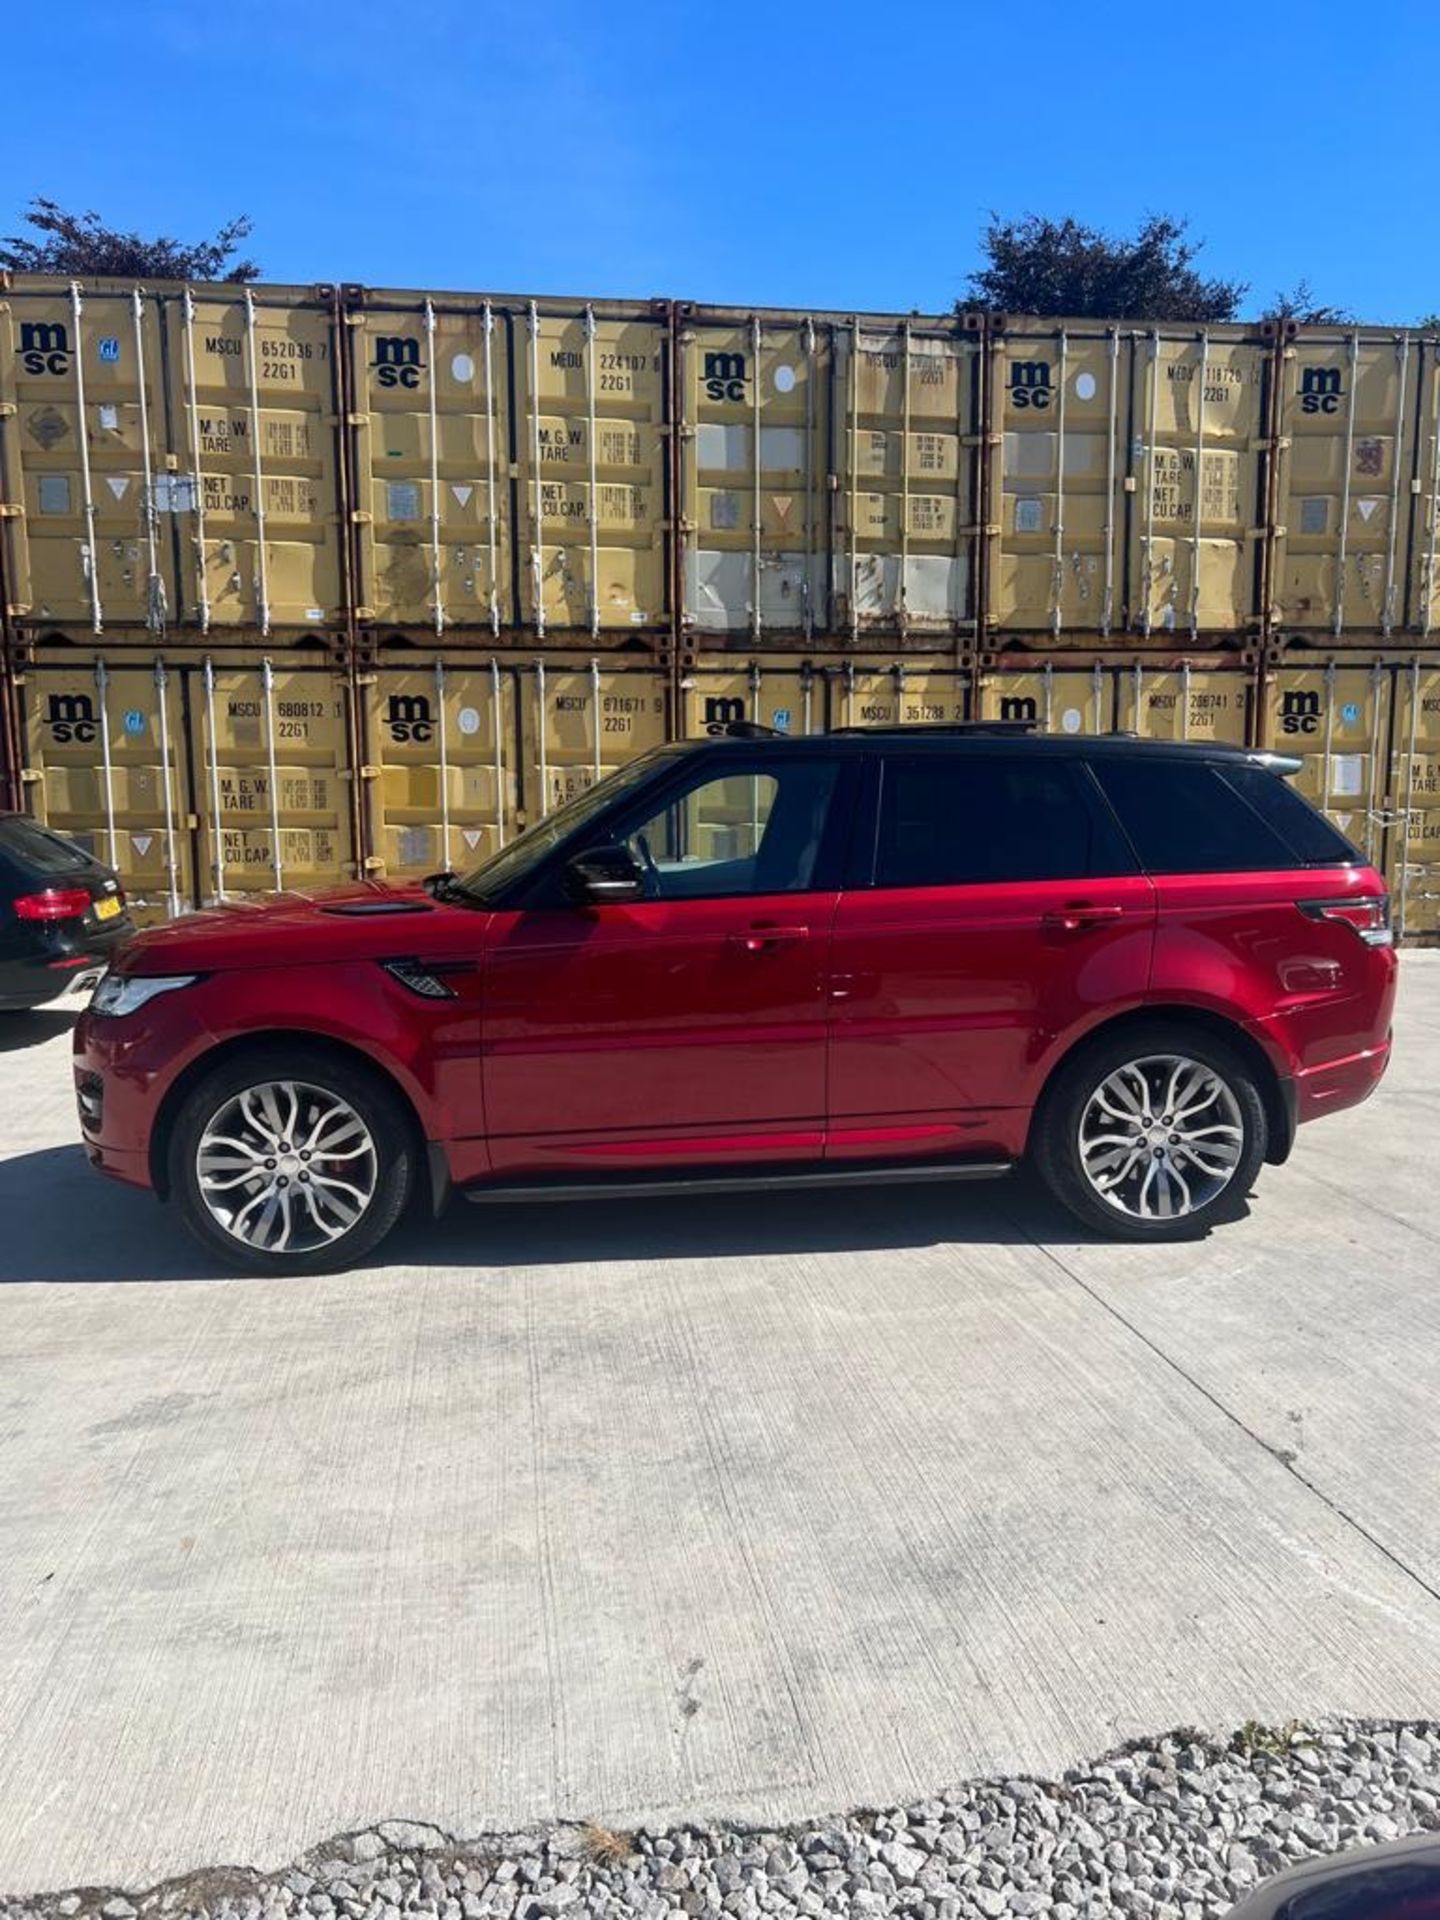 2014 LAND ROVER RANGE ROVER SPORT AUTOBIOGRAPHY DYNAMIC SDV8 AUTOMATIC RED *PLUS VAT* - Image 3 of 13